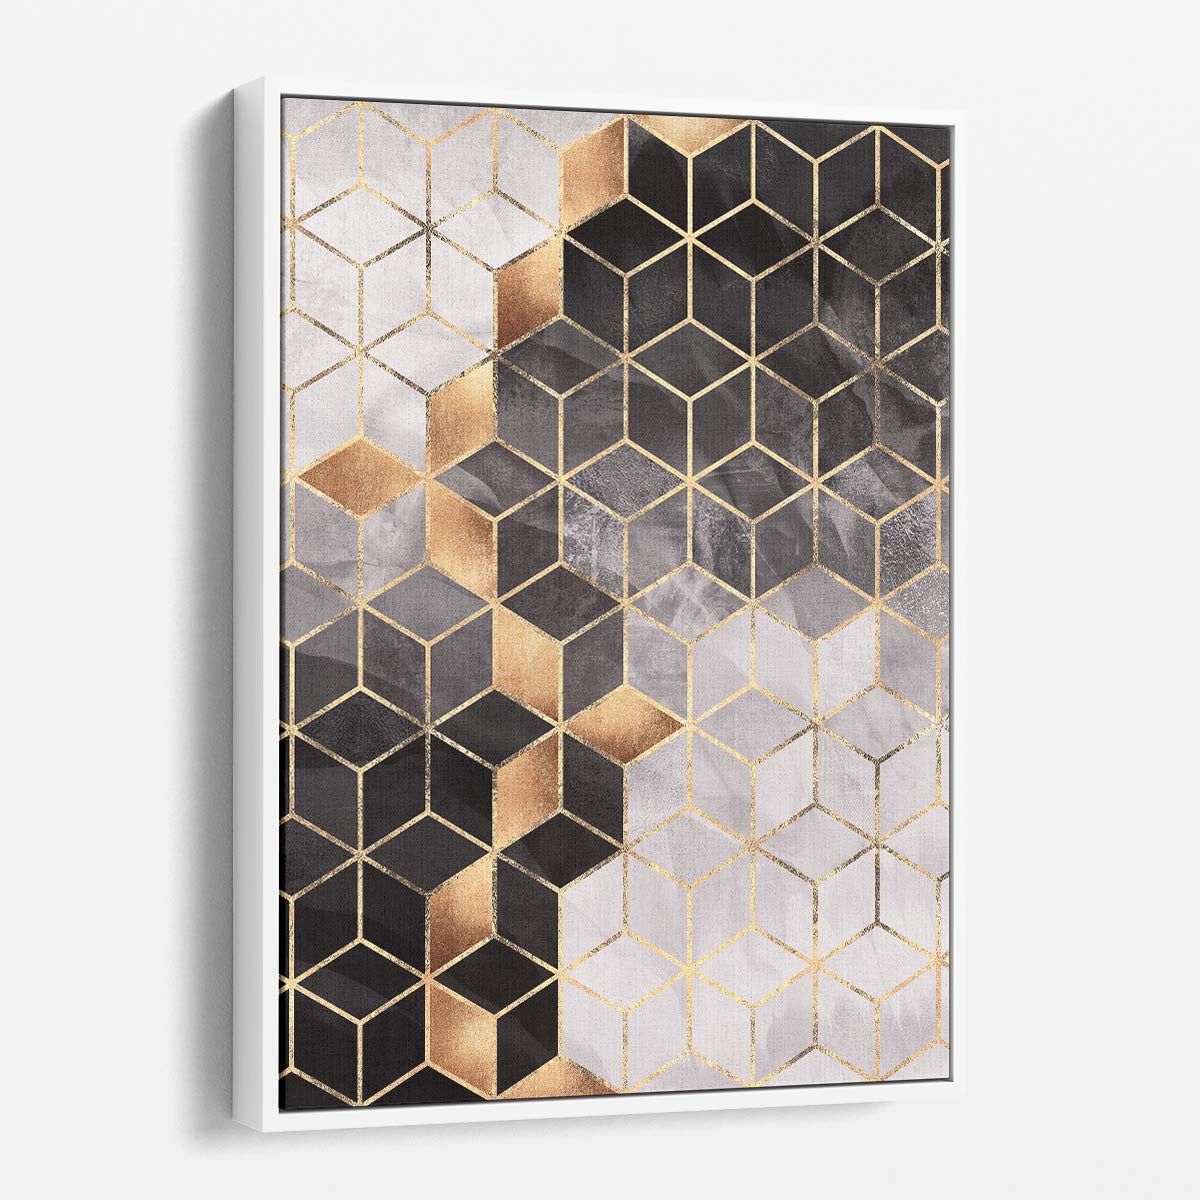 Elisabeth Fredriksson Golden Geometric Cube Illustration Wall Art by Luxuriance Designs, made in USA